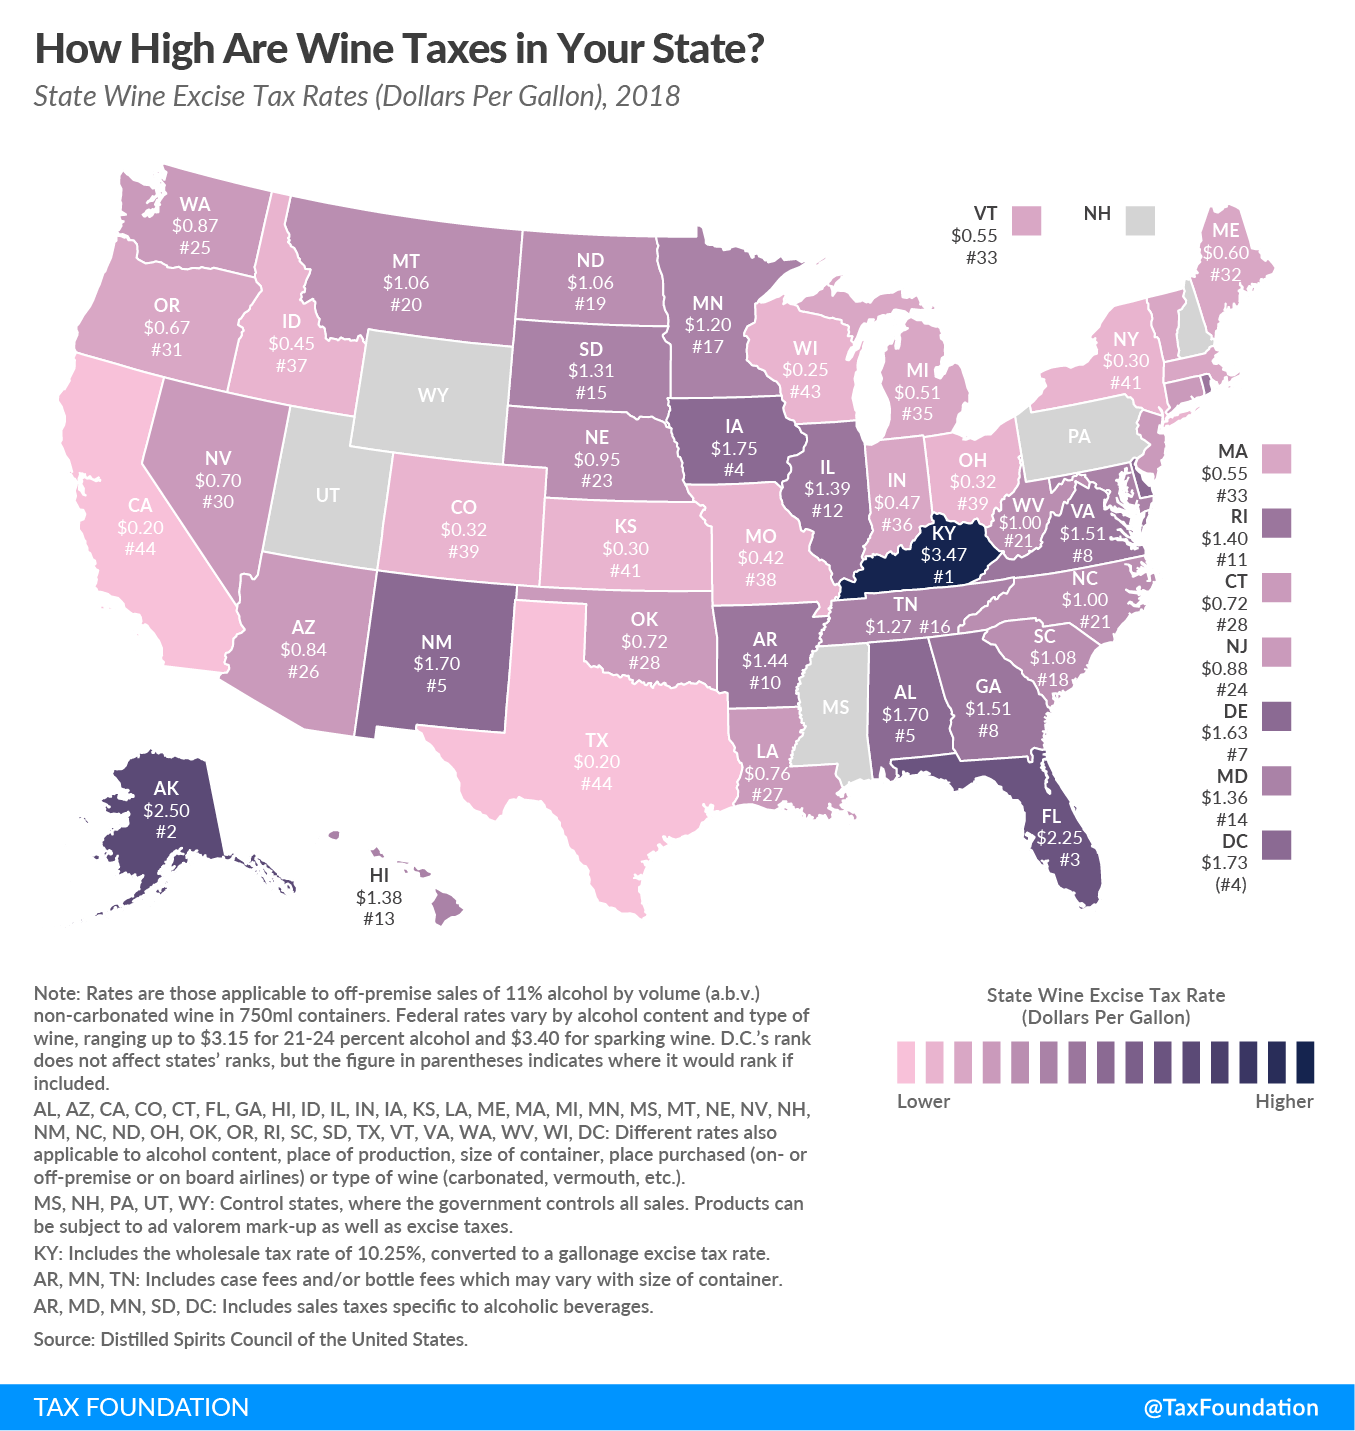 How high are wine taxes in your state? 2018